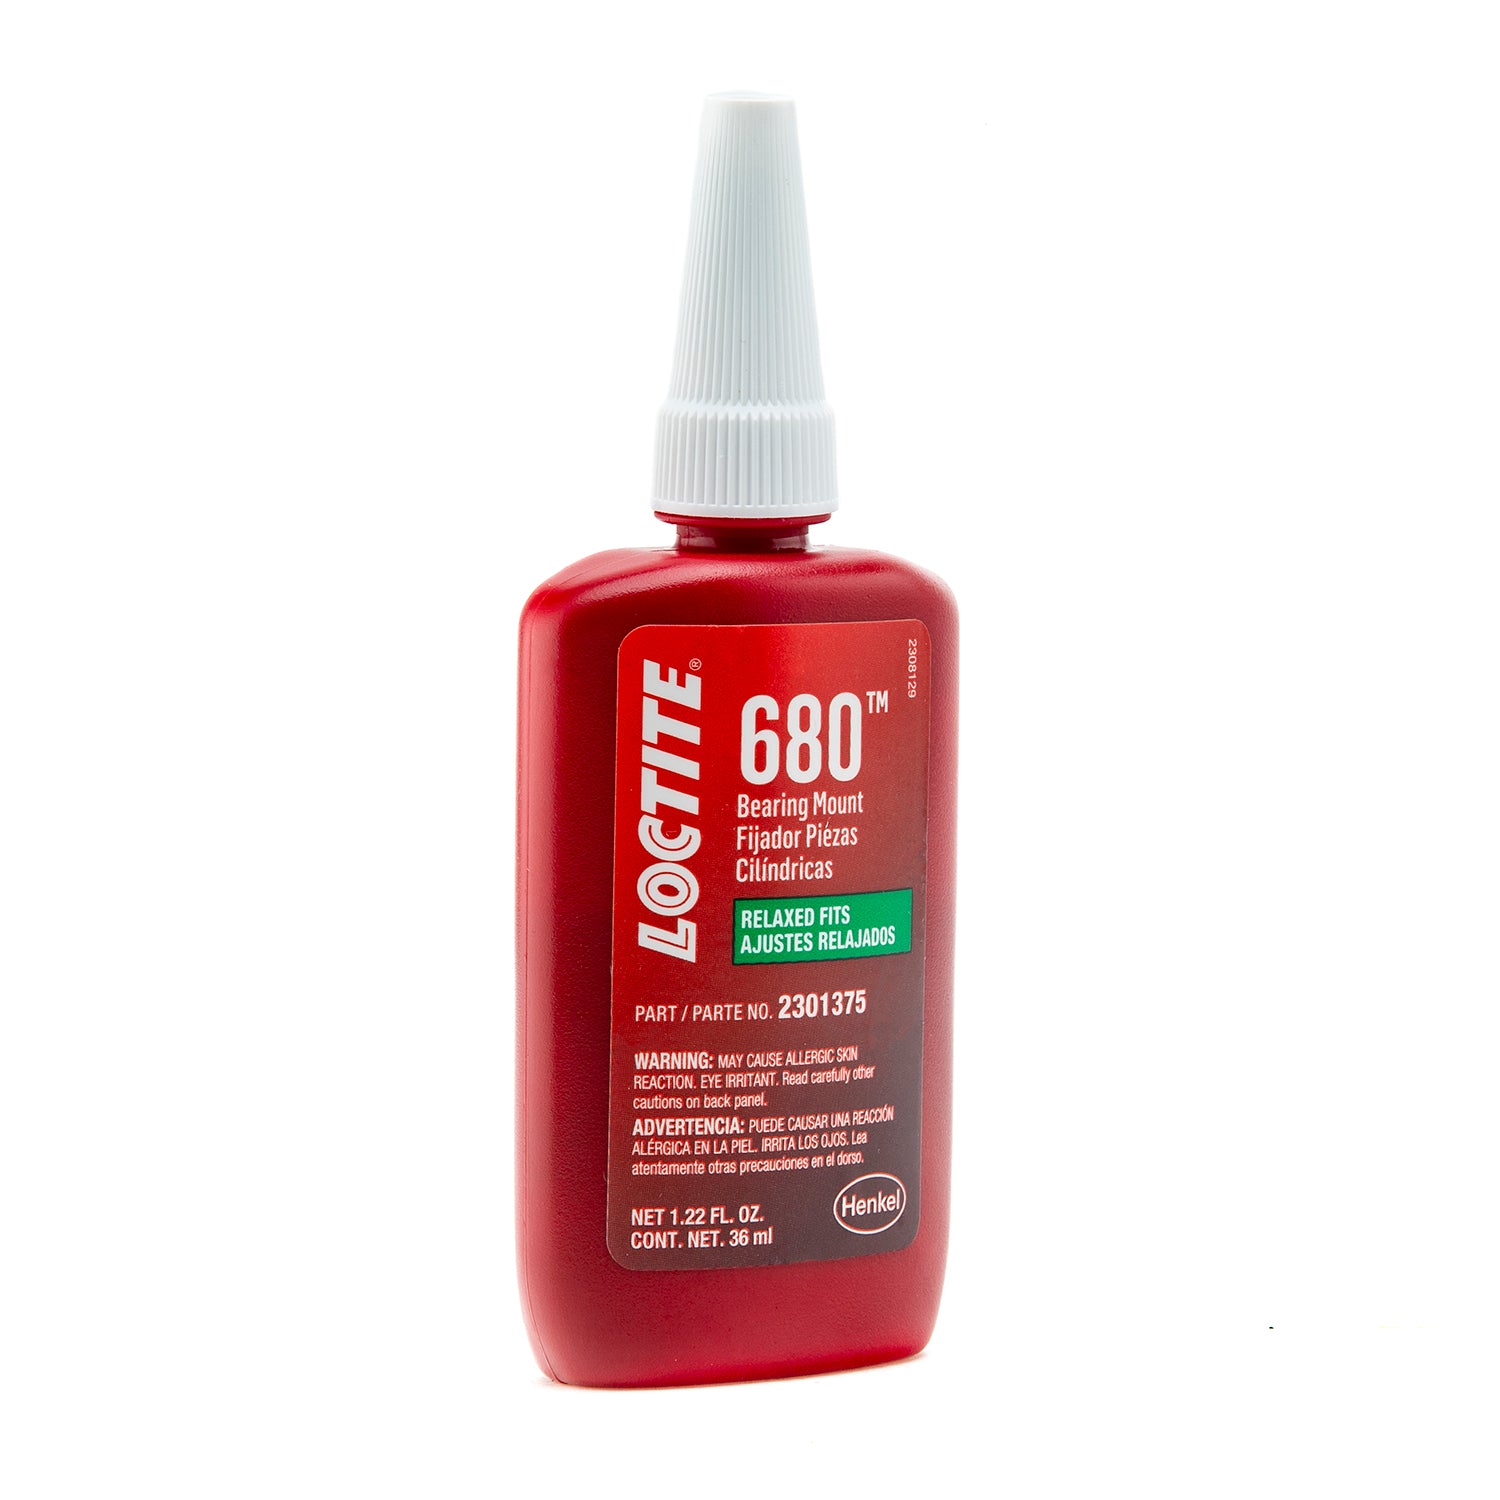 Loctite Bearing Mount 680™ - Relaxed Fits - 36 ML bottle data-zoom=